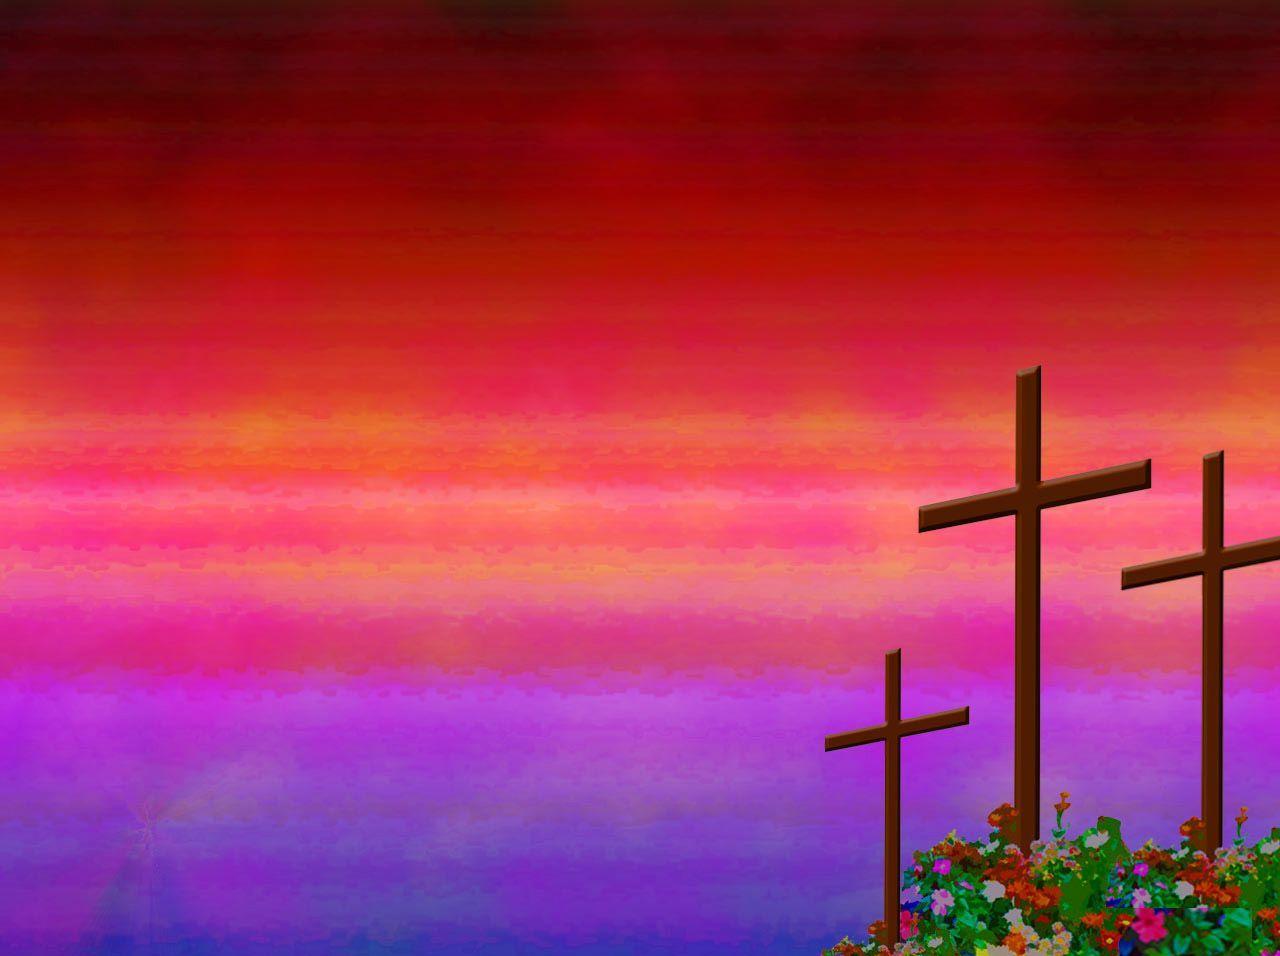 Christian rose garden PowerPoint background. Available in 1280x this PowerPoint is free. Worship background, Church background, Christian picture